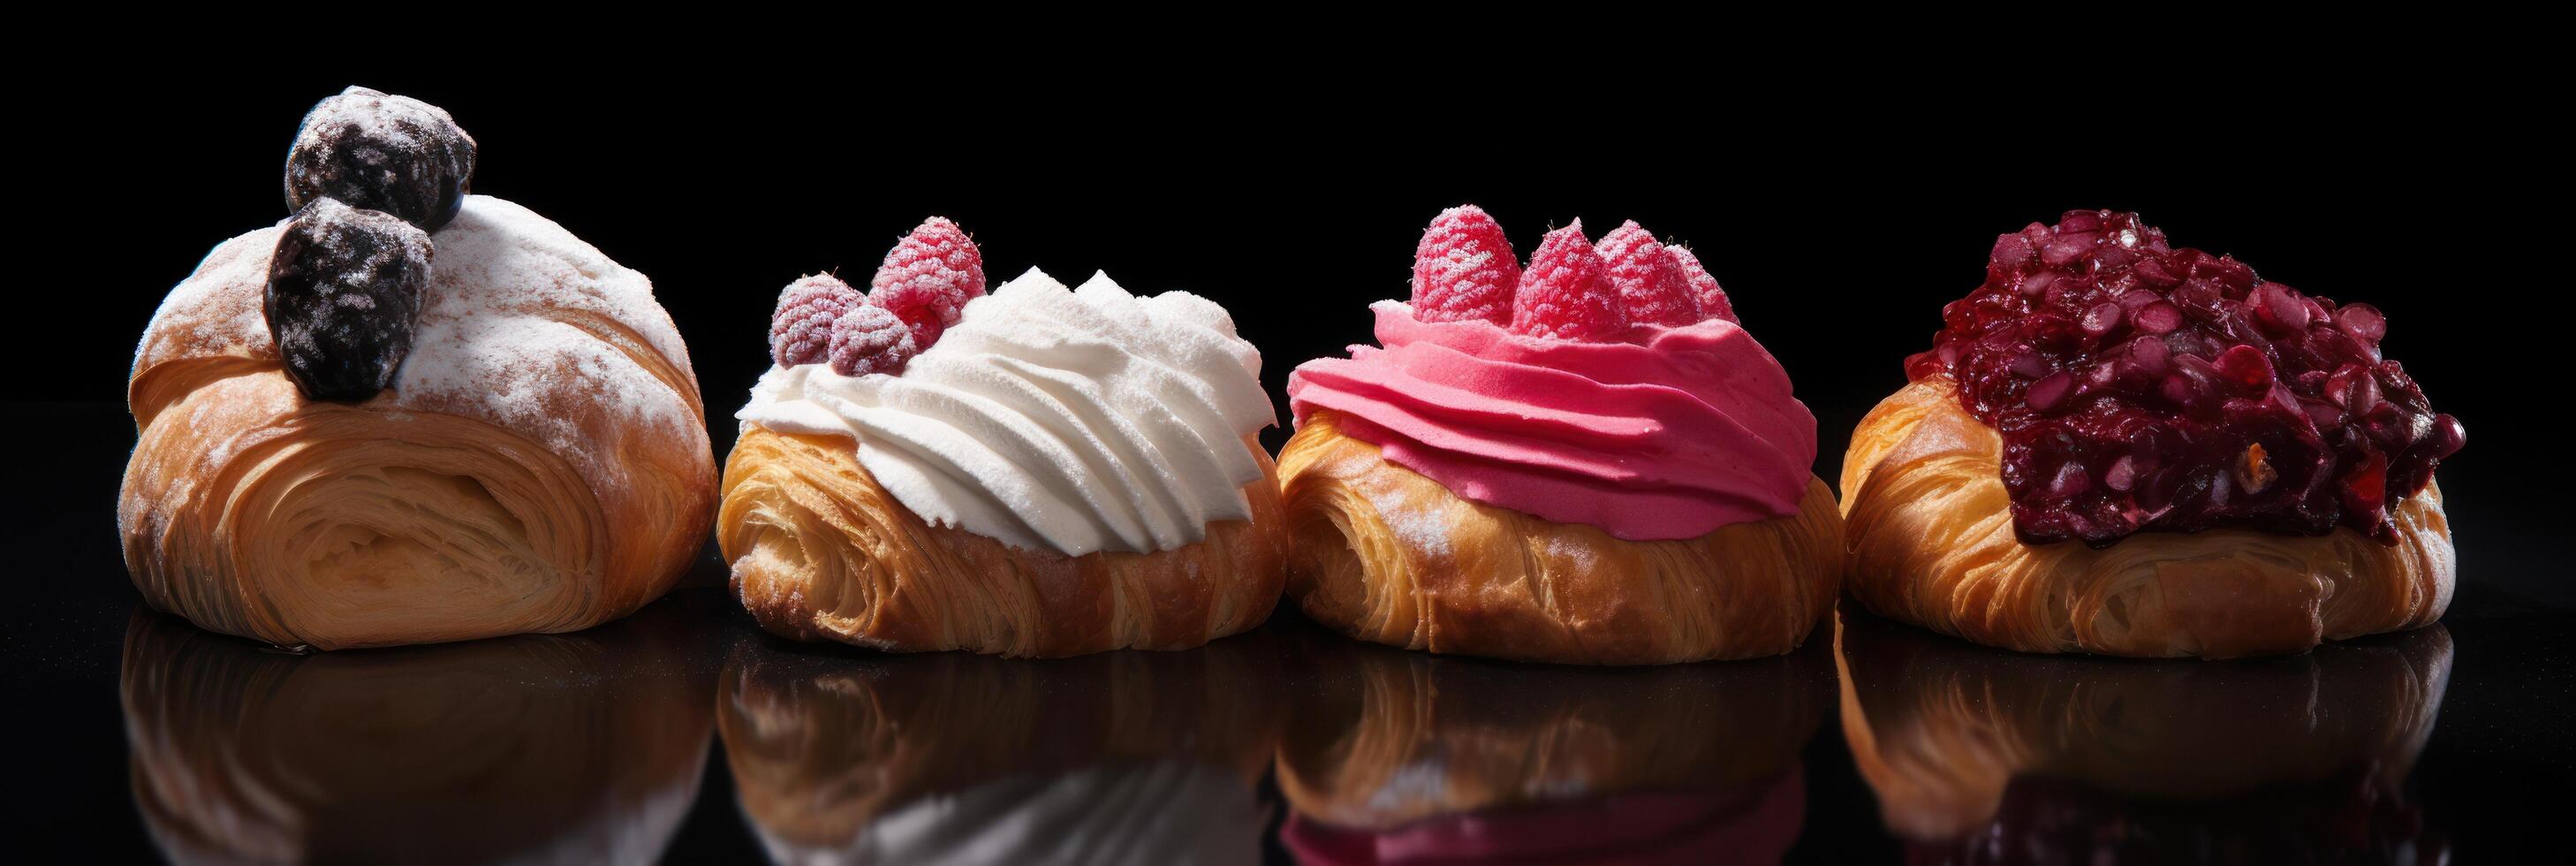 AI generated four pastries with different flavors are shown photo